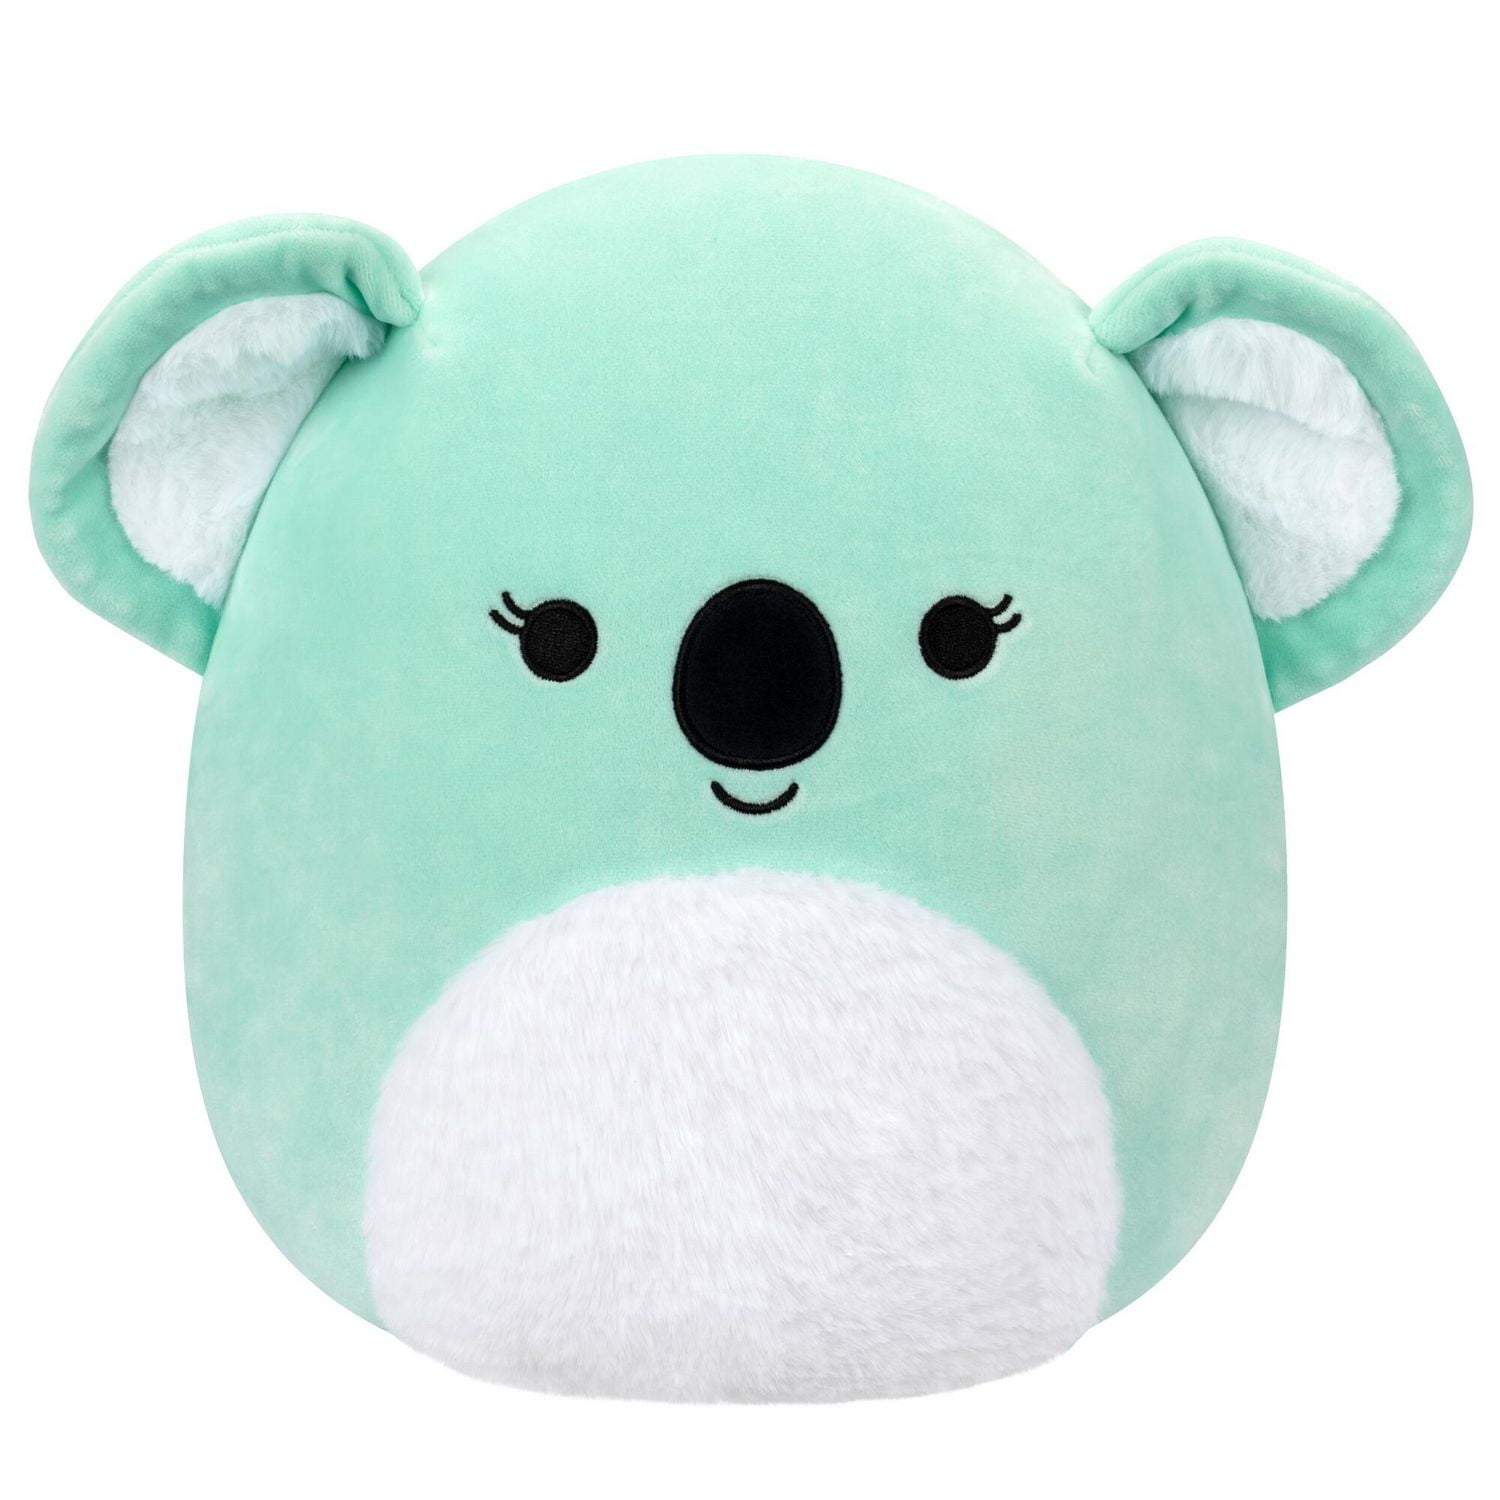 Squishmallows - Coco the Mint Green Koala with White Belly and White Ears 